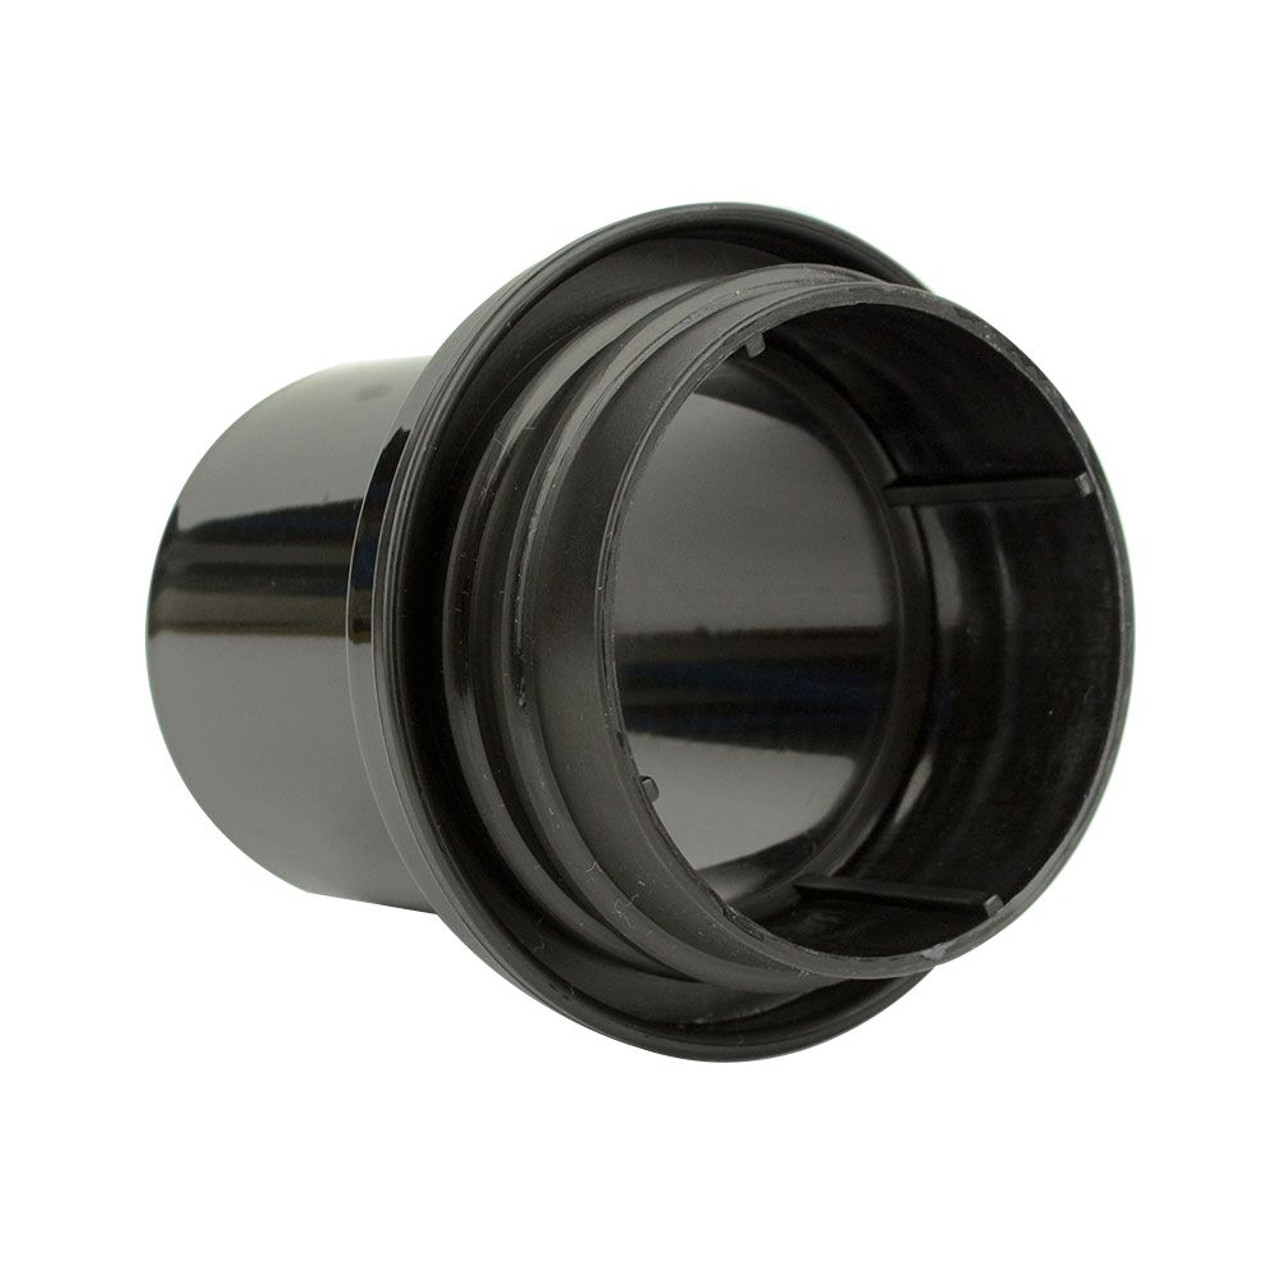 Big Horn 2-1/2 Inch Wet/Dry Vacuum Cleaner Accessory Adapter for 2-1/2 Inch Hose 11133